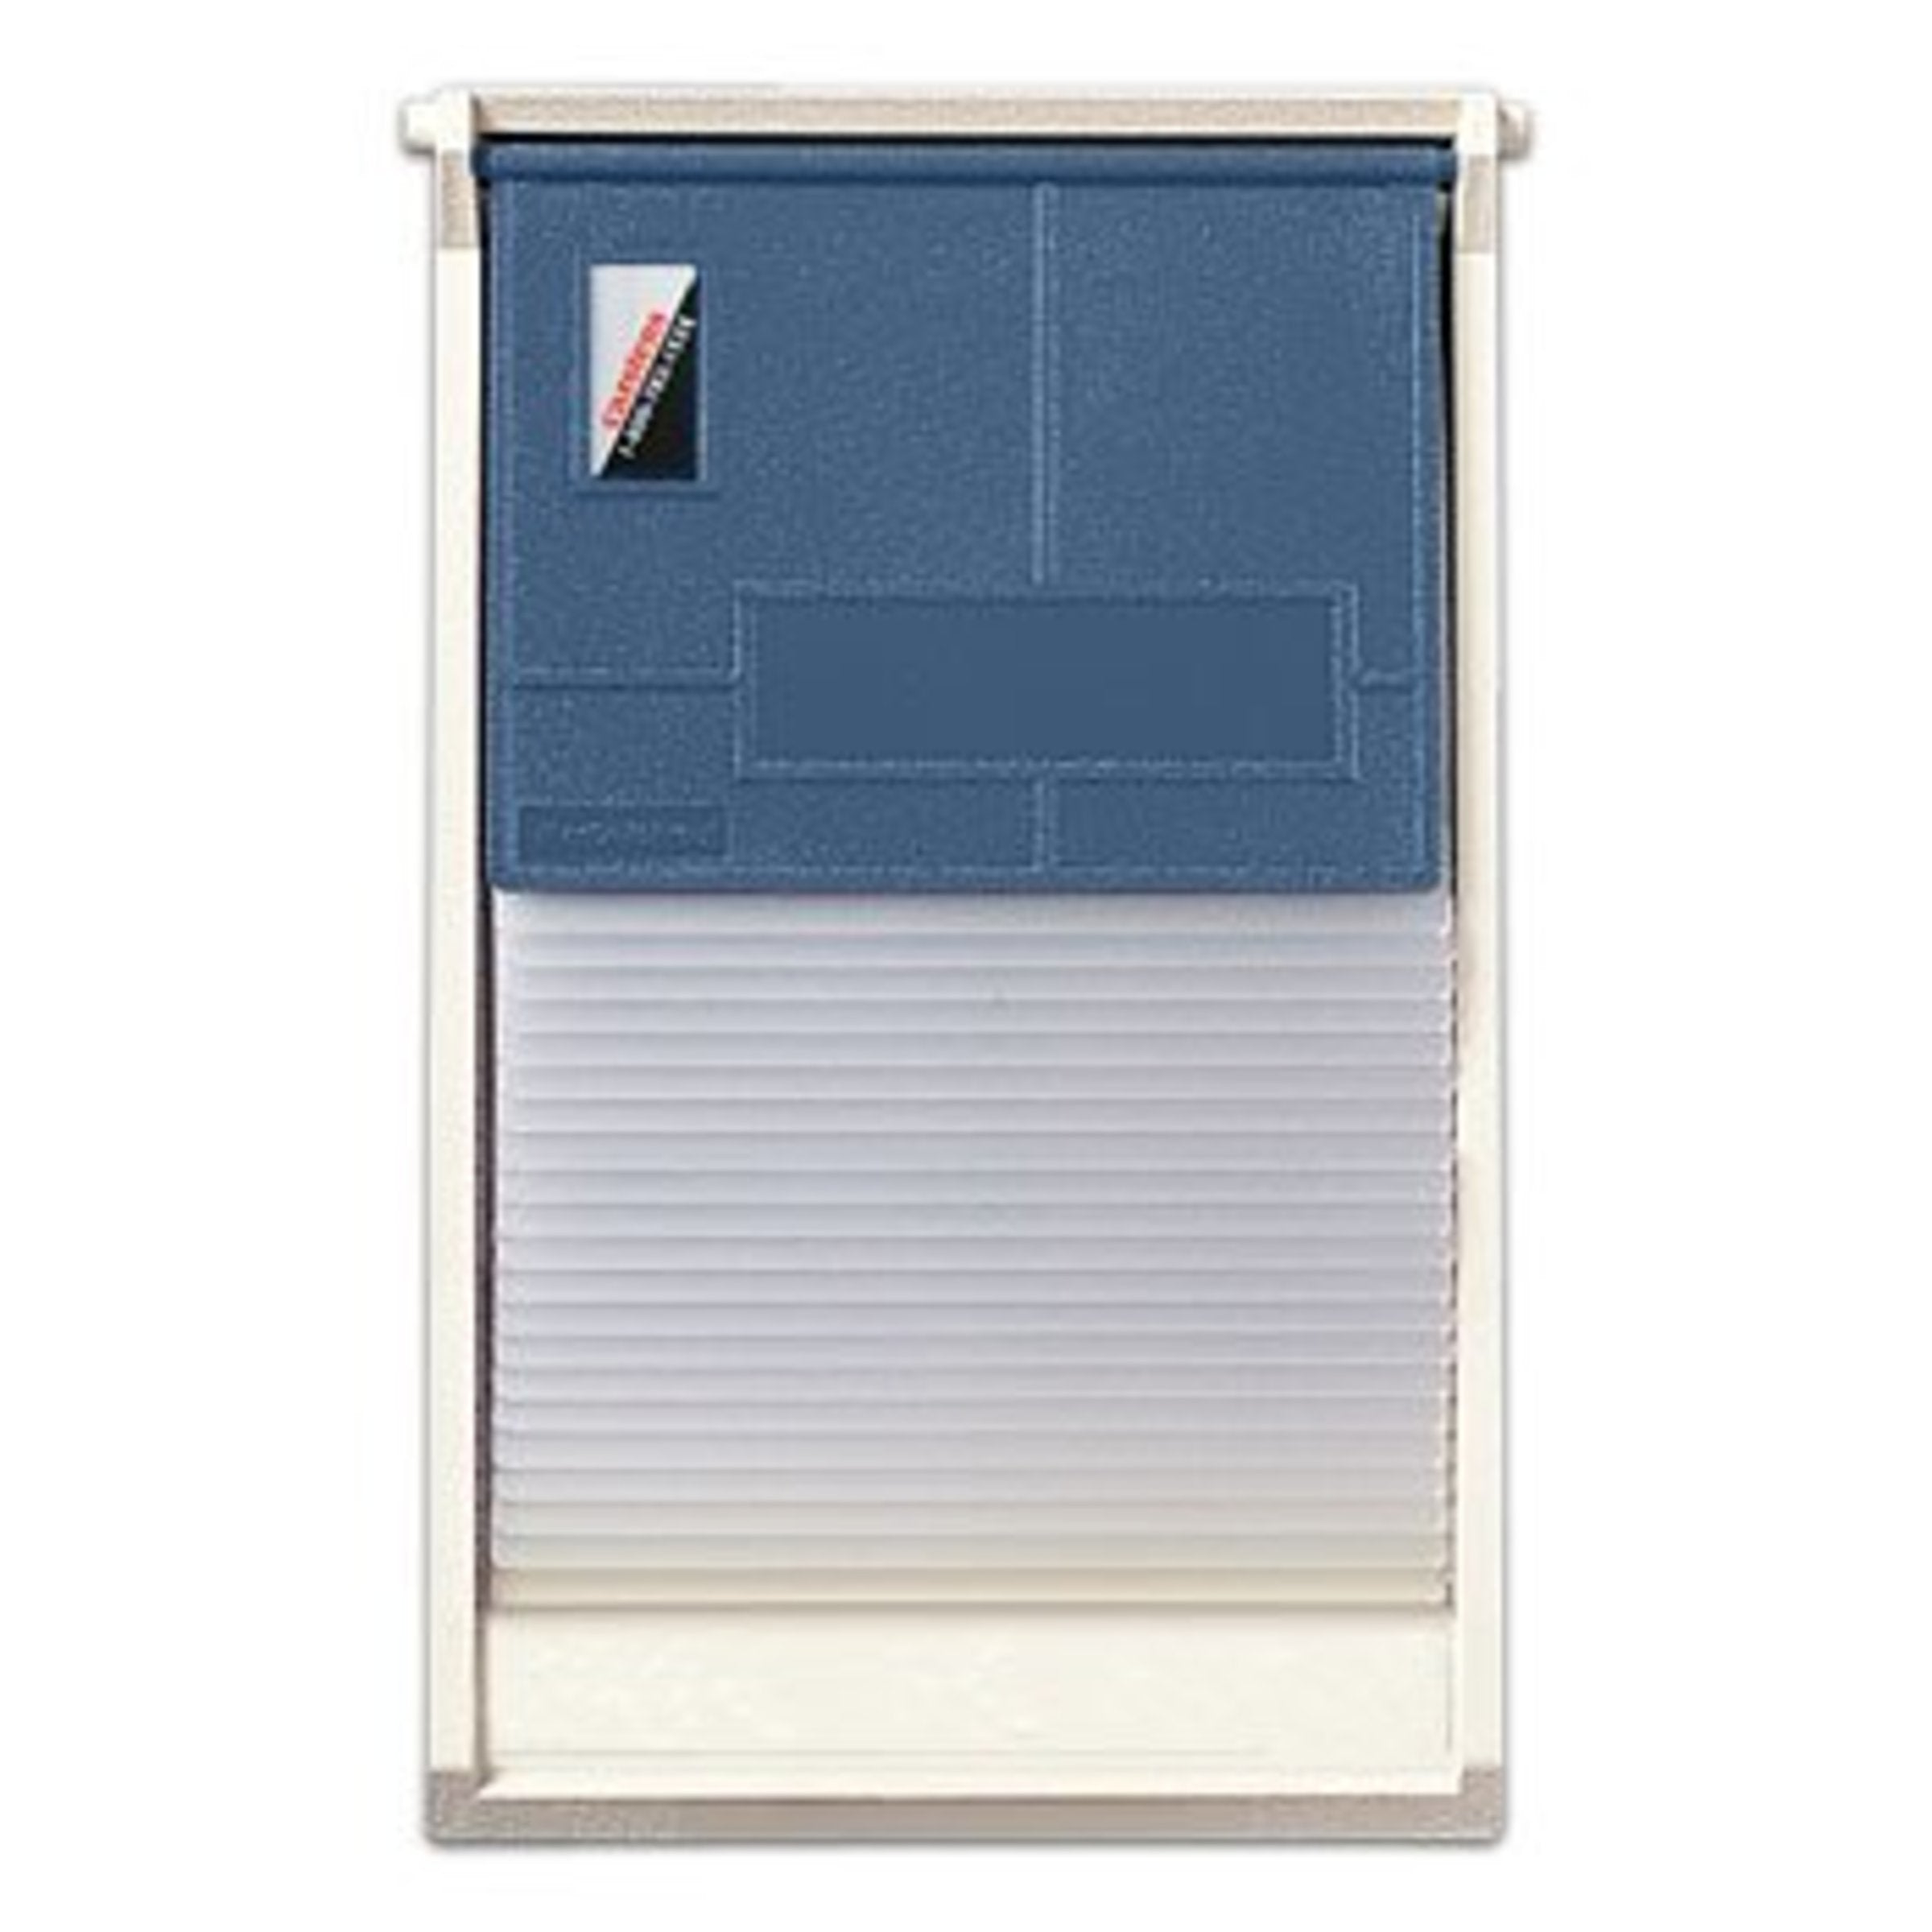 Kardex Visitray Document Filing System for 8.5" x 6" Sheets